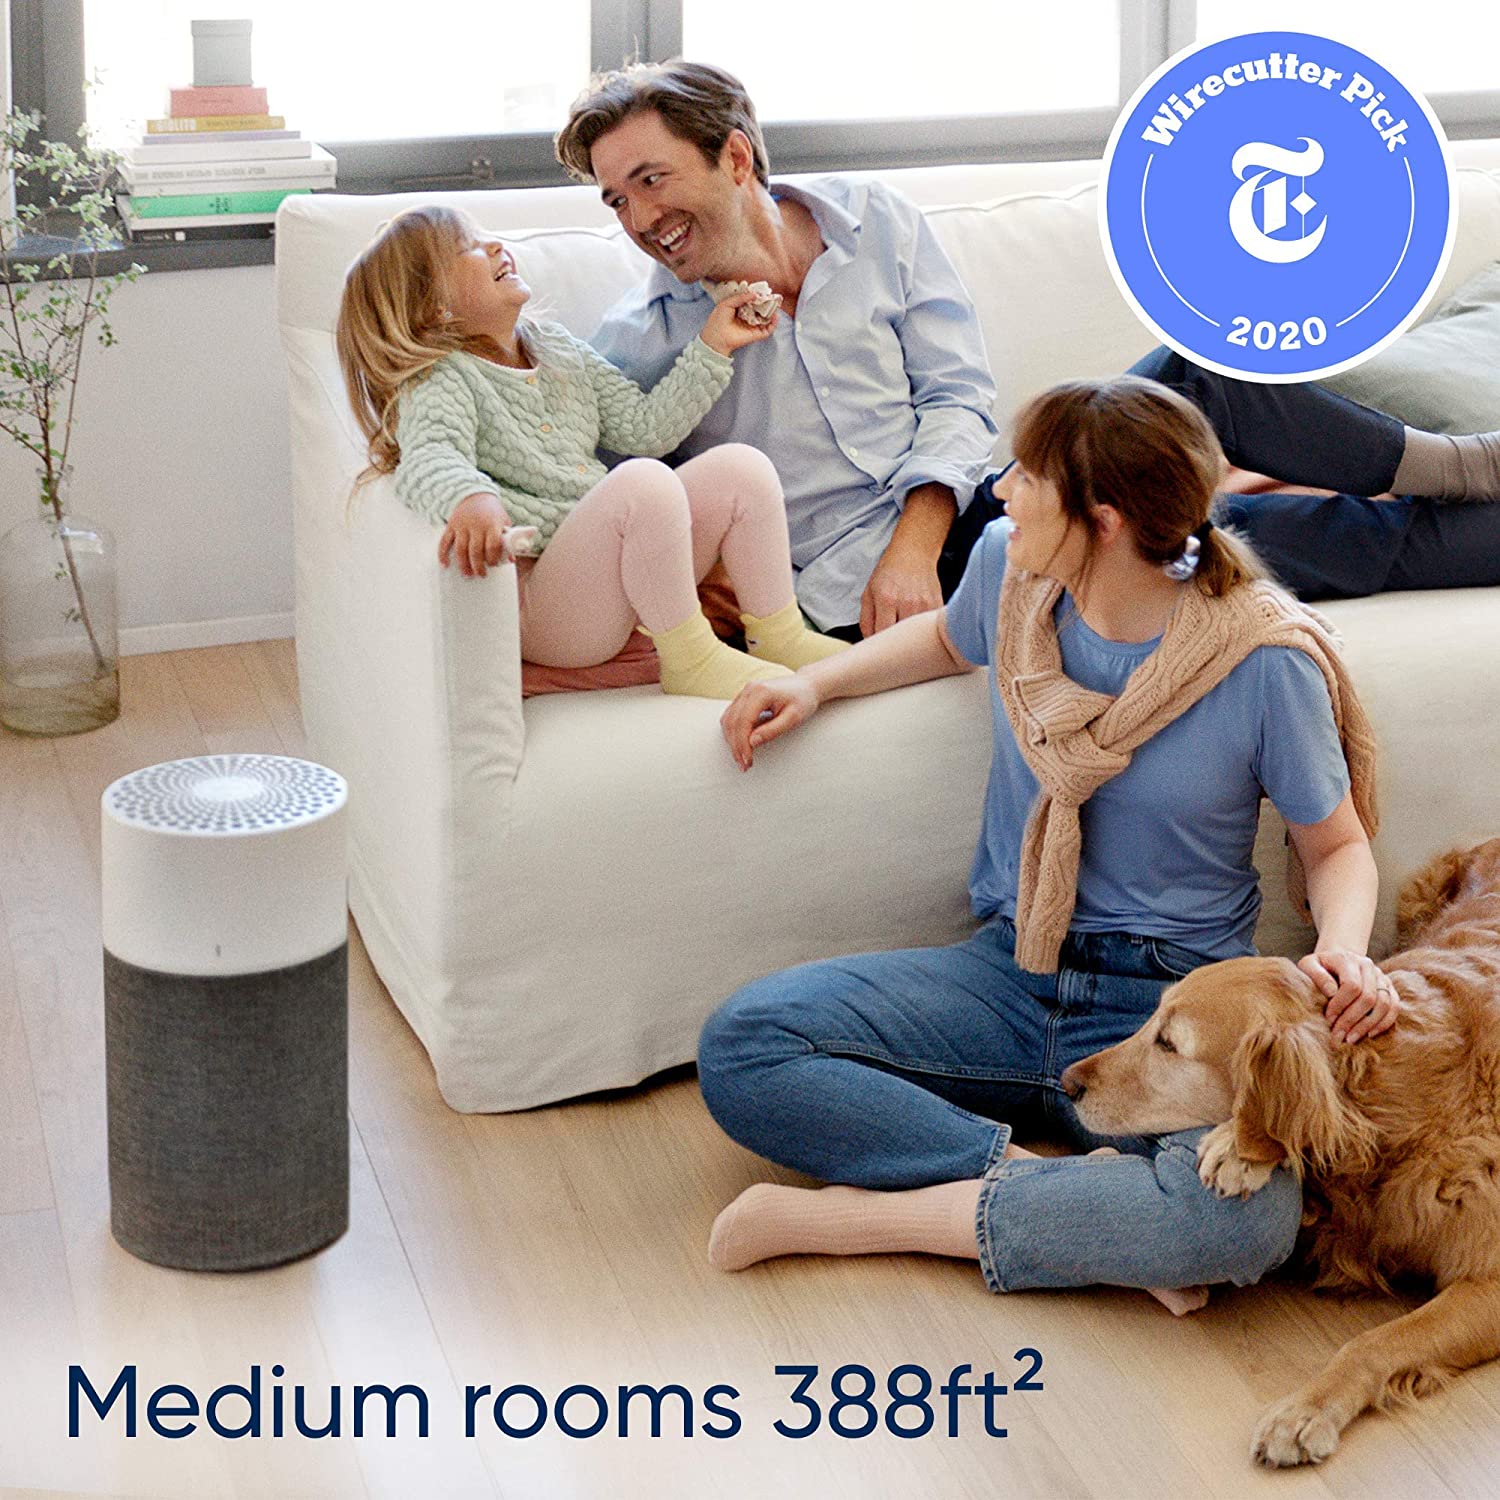 Blueair - Blue 3410 Air Purifier 36m2 | Kills germs and removes allergens, dust, and molds